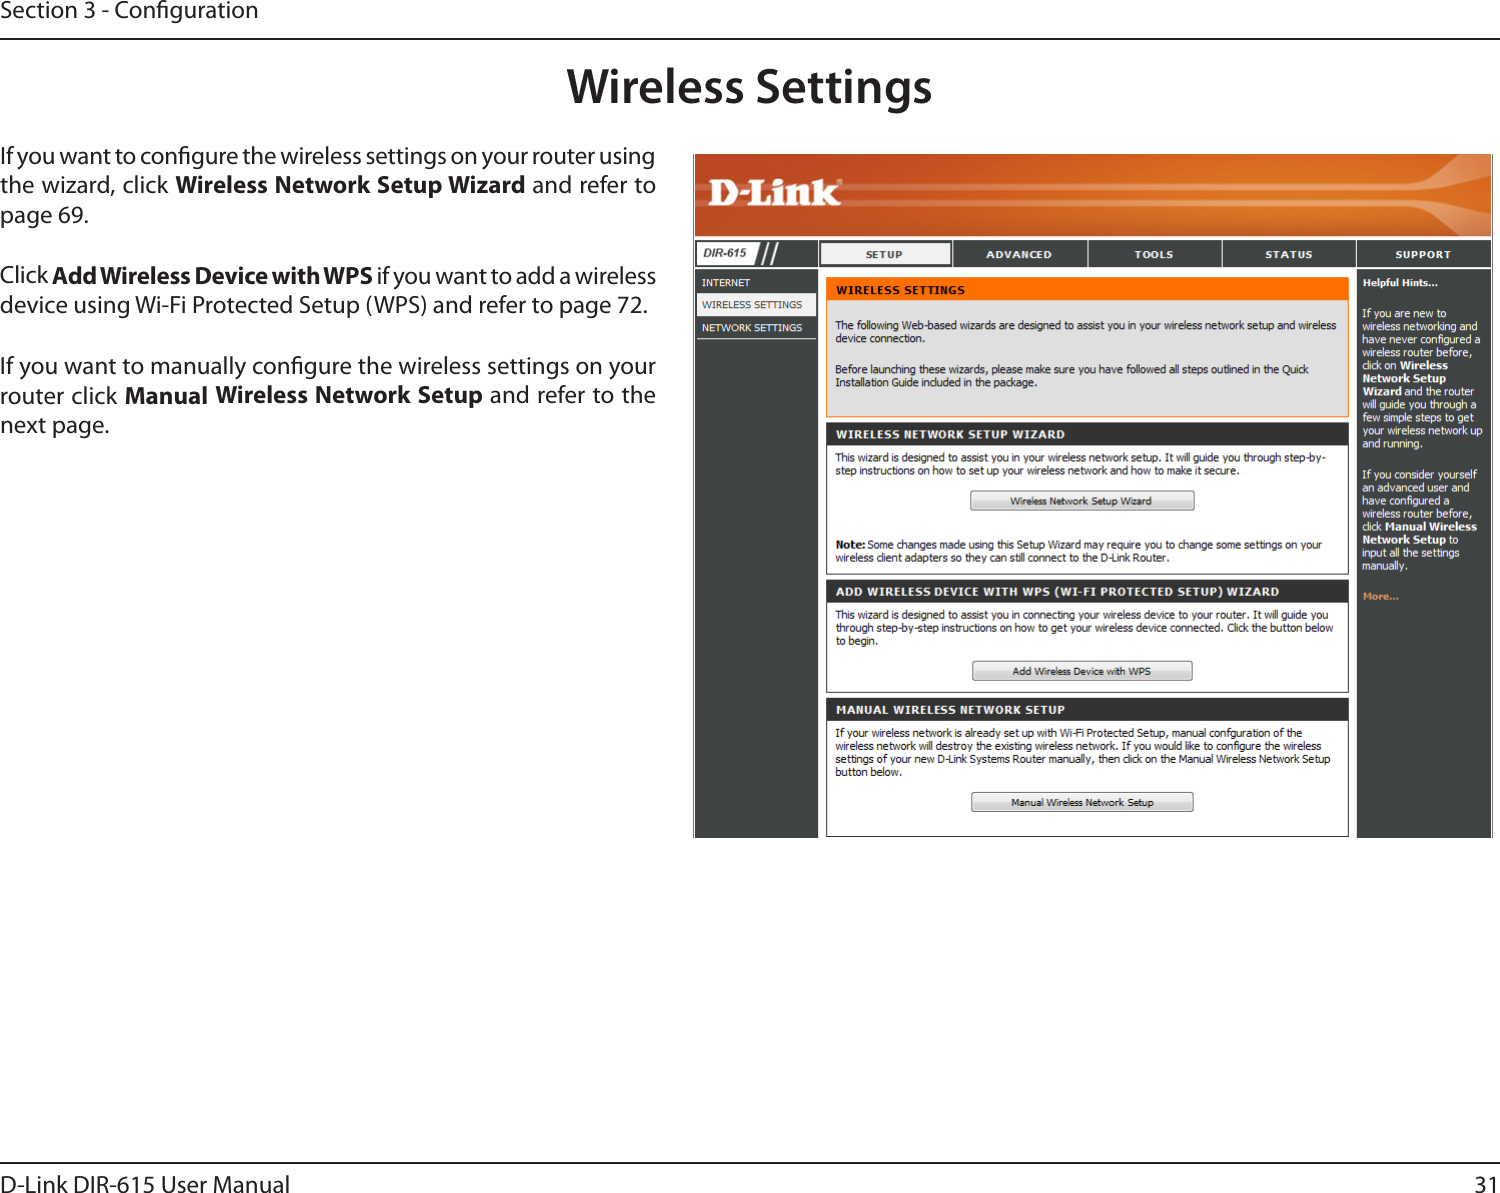 31D-Link DIR-615 User ManualSection 3 - CongurationWireless SettingsIf you want to congure the wireless settings on your router using the wizard, click Wireless Network Setup Wizard and refer to page 69.Click Add Wireless Device with WPS if you want to add a wireless device using Wi-Fi Protected Setup (WPS) and refer to page 72.If you want to manually congure the wireless settings on your router click Manual Wireless Network Setup and refer to the next page.